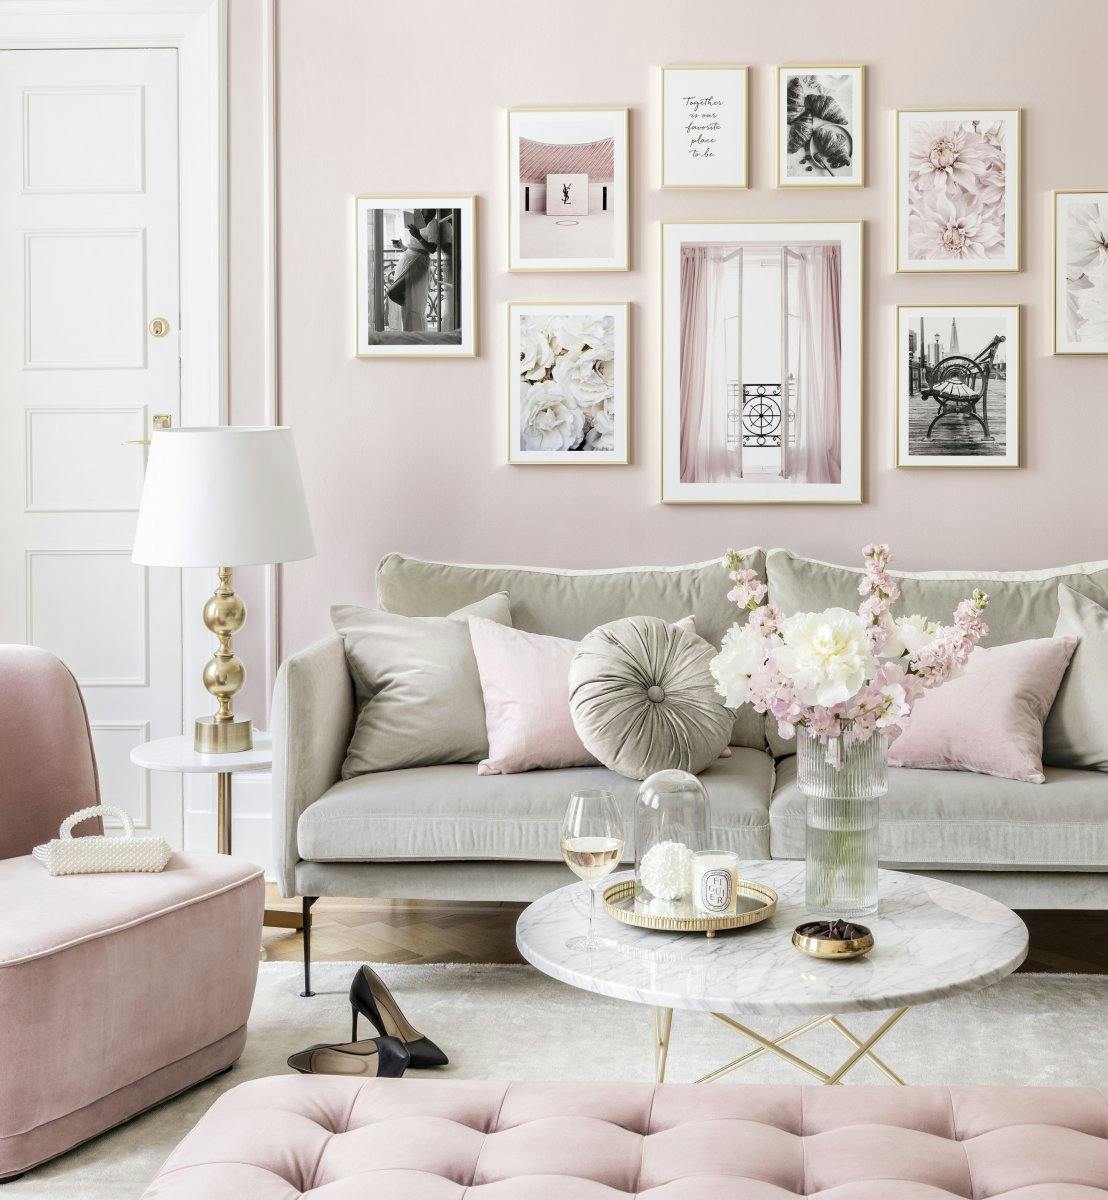 Pink fashion gallery wall fashion prints flower posters pink living room